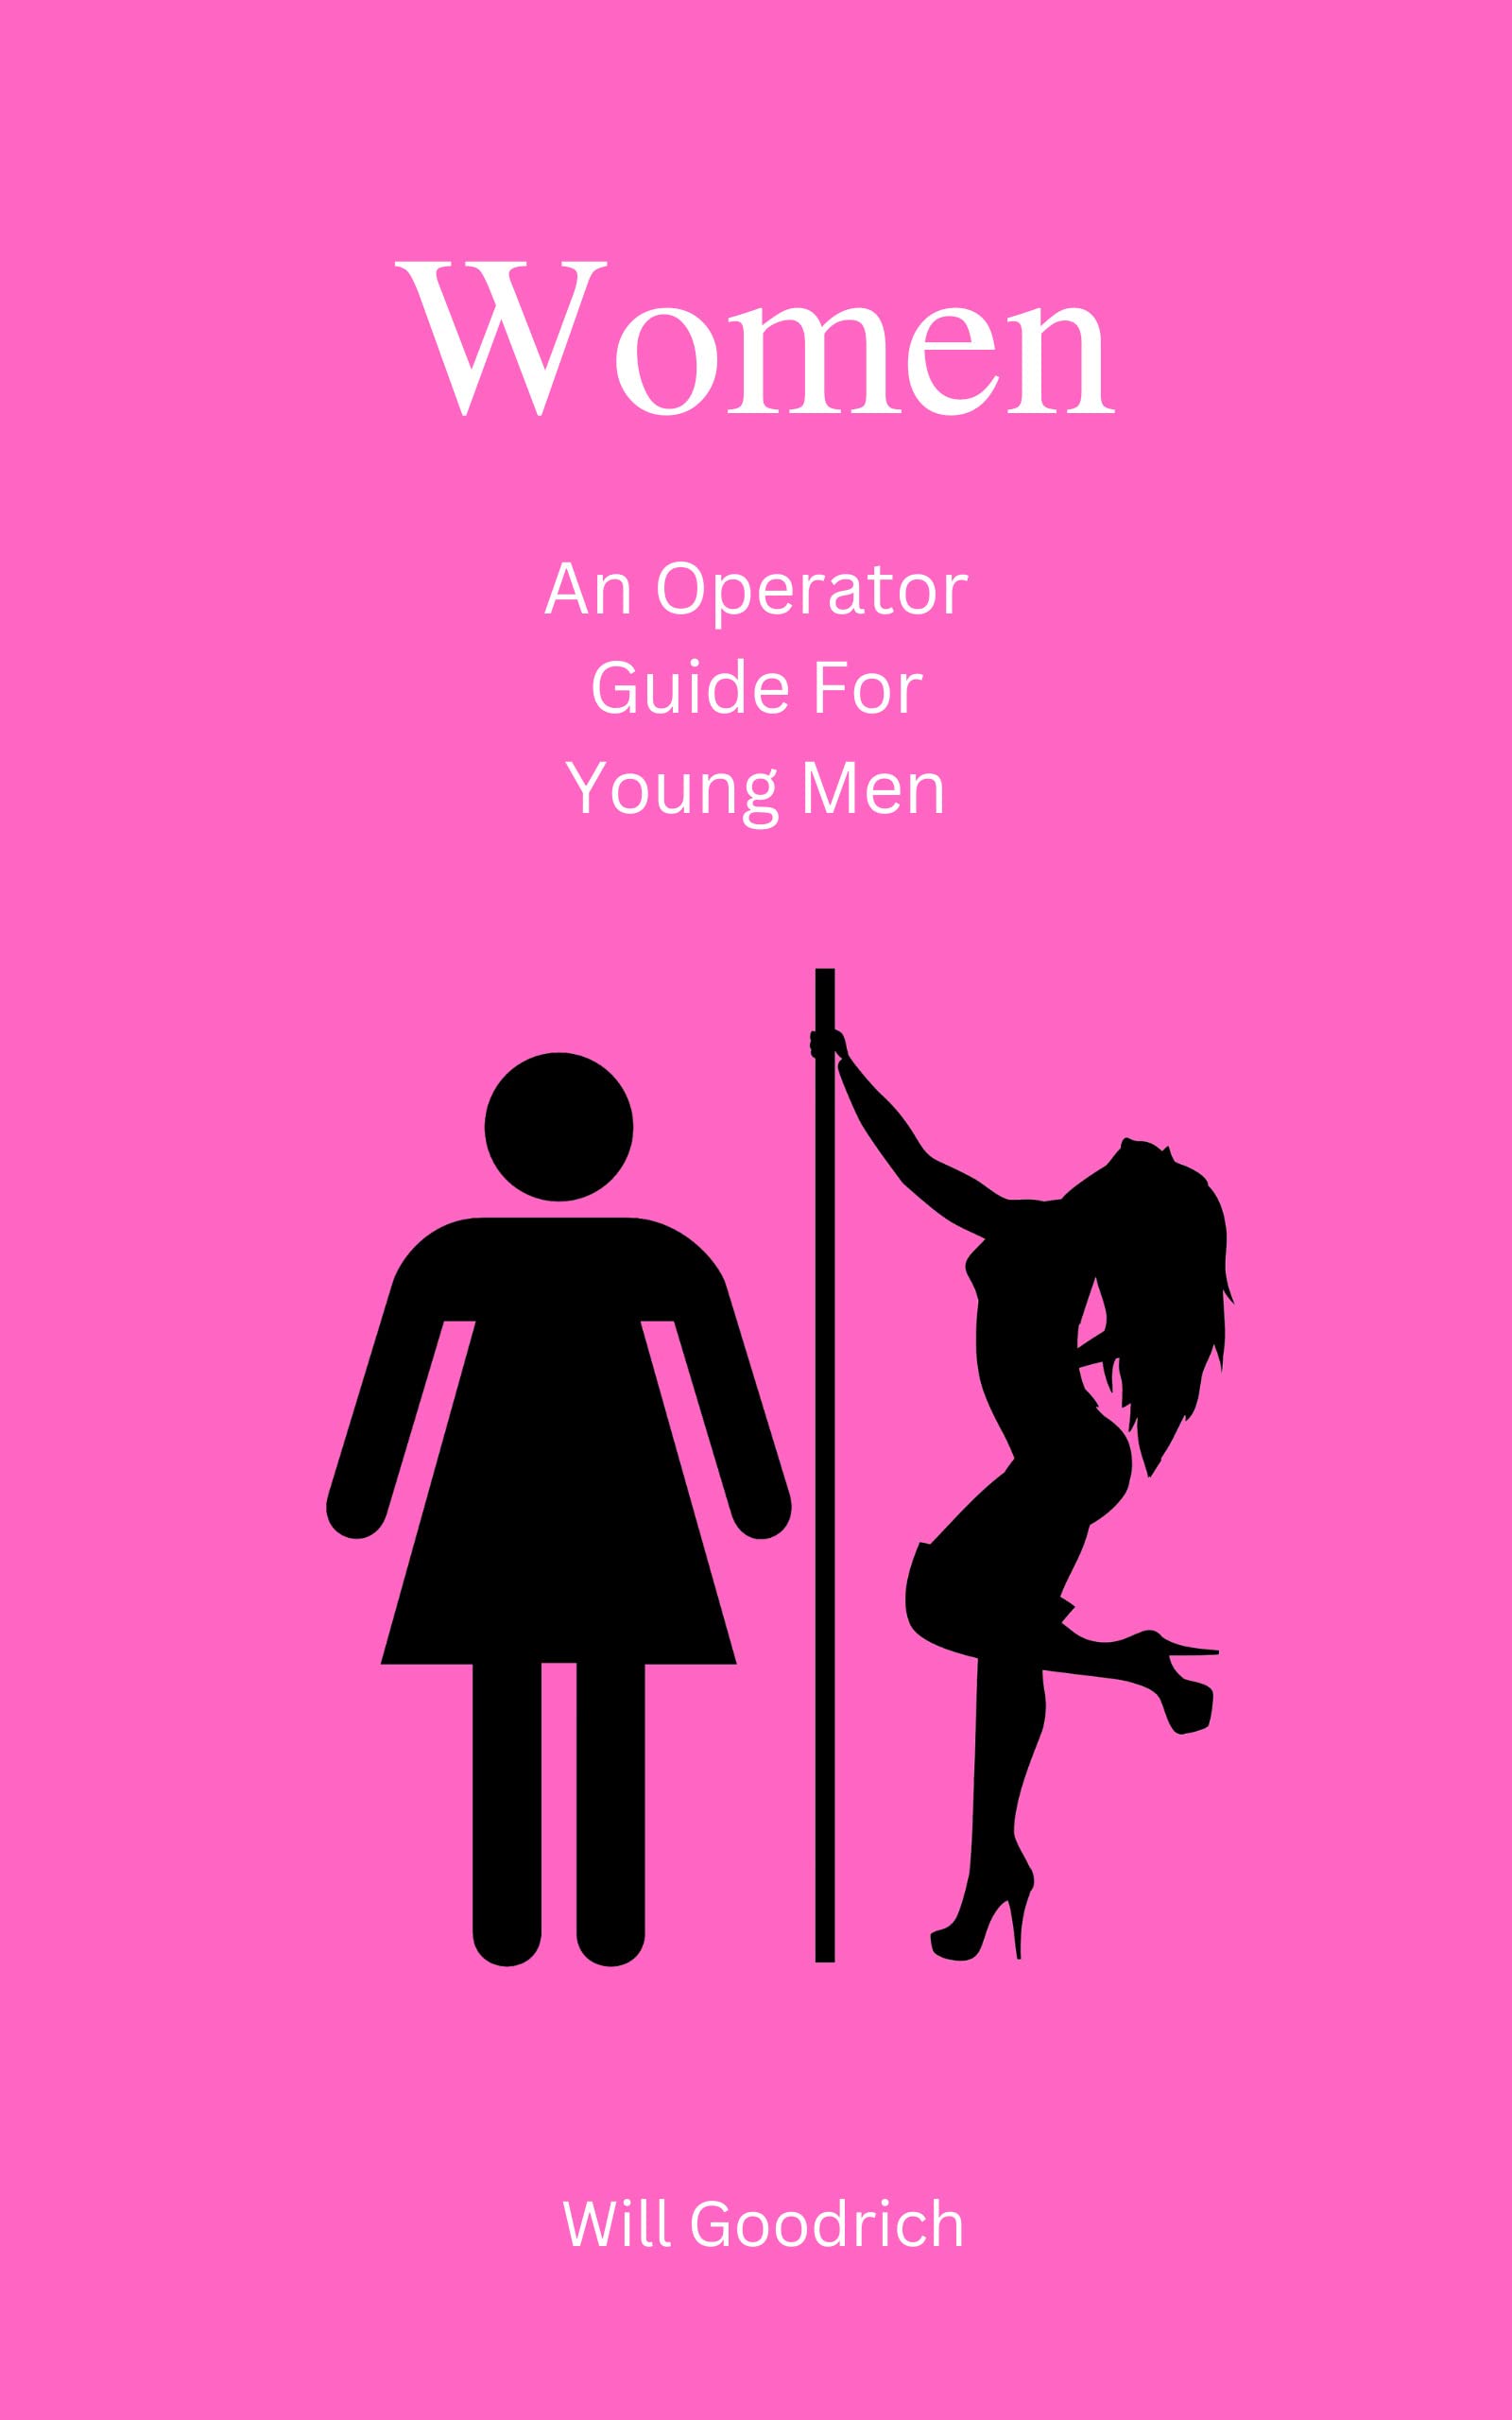 Women: An Operator Guide For Young Men by Will Goodrich